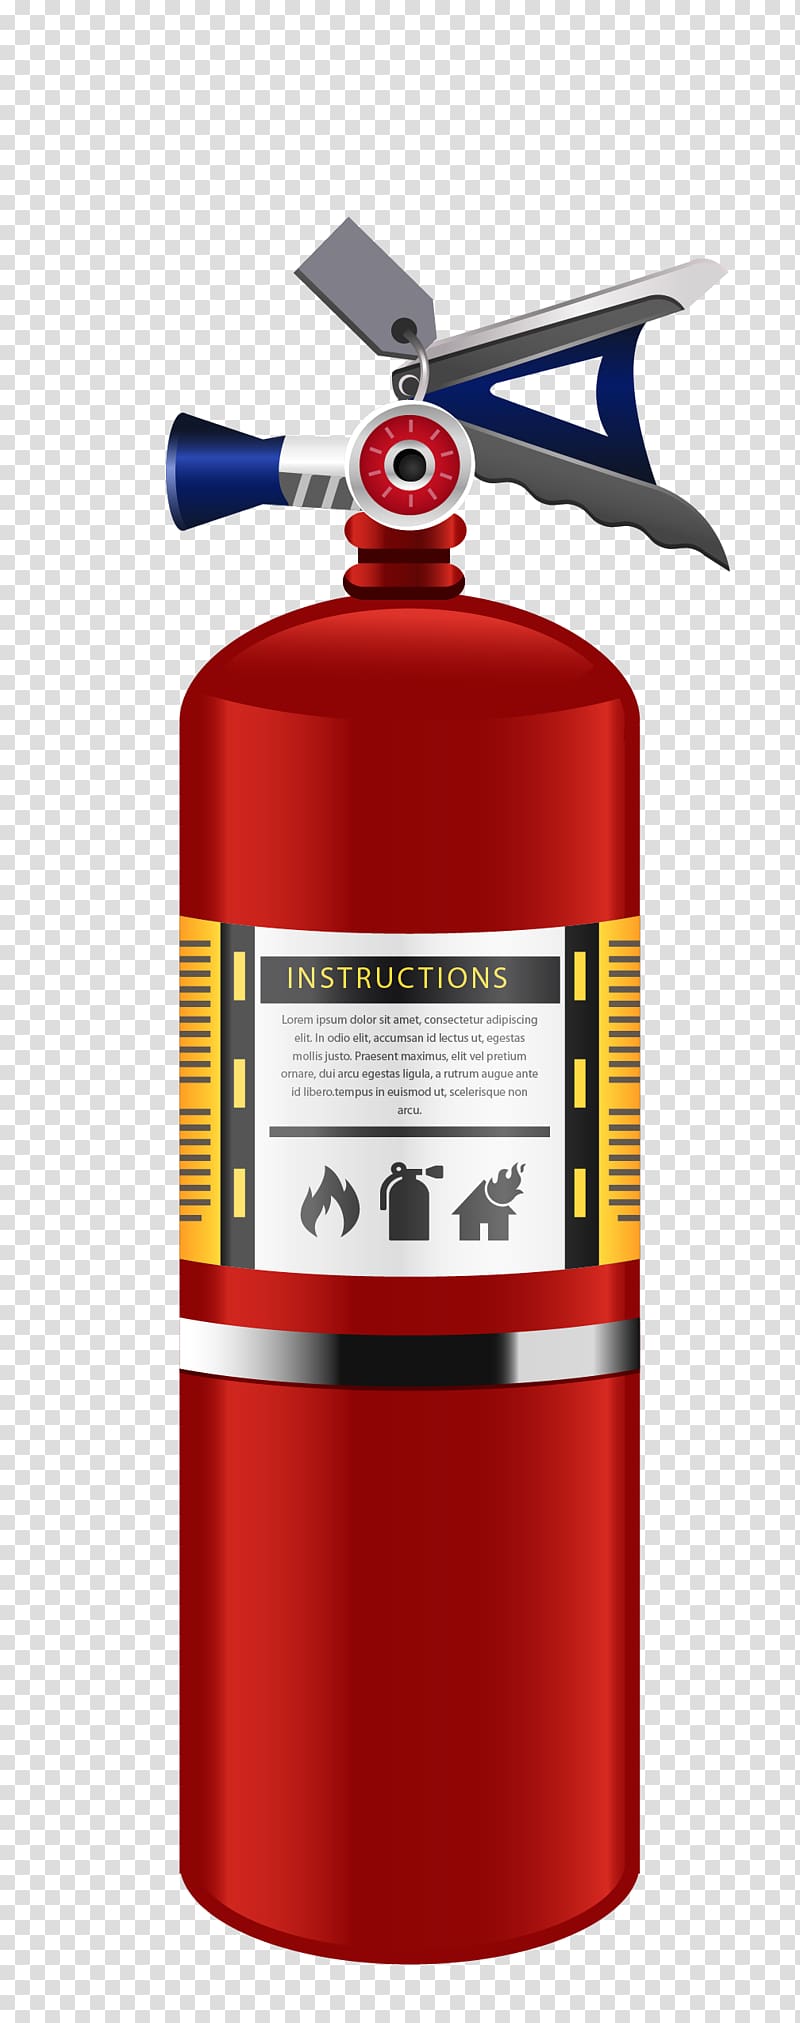 Fire extinguisher Firefighting foam, Textured material red fire extinguisher transparent background PNG clipart